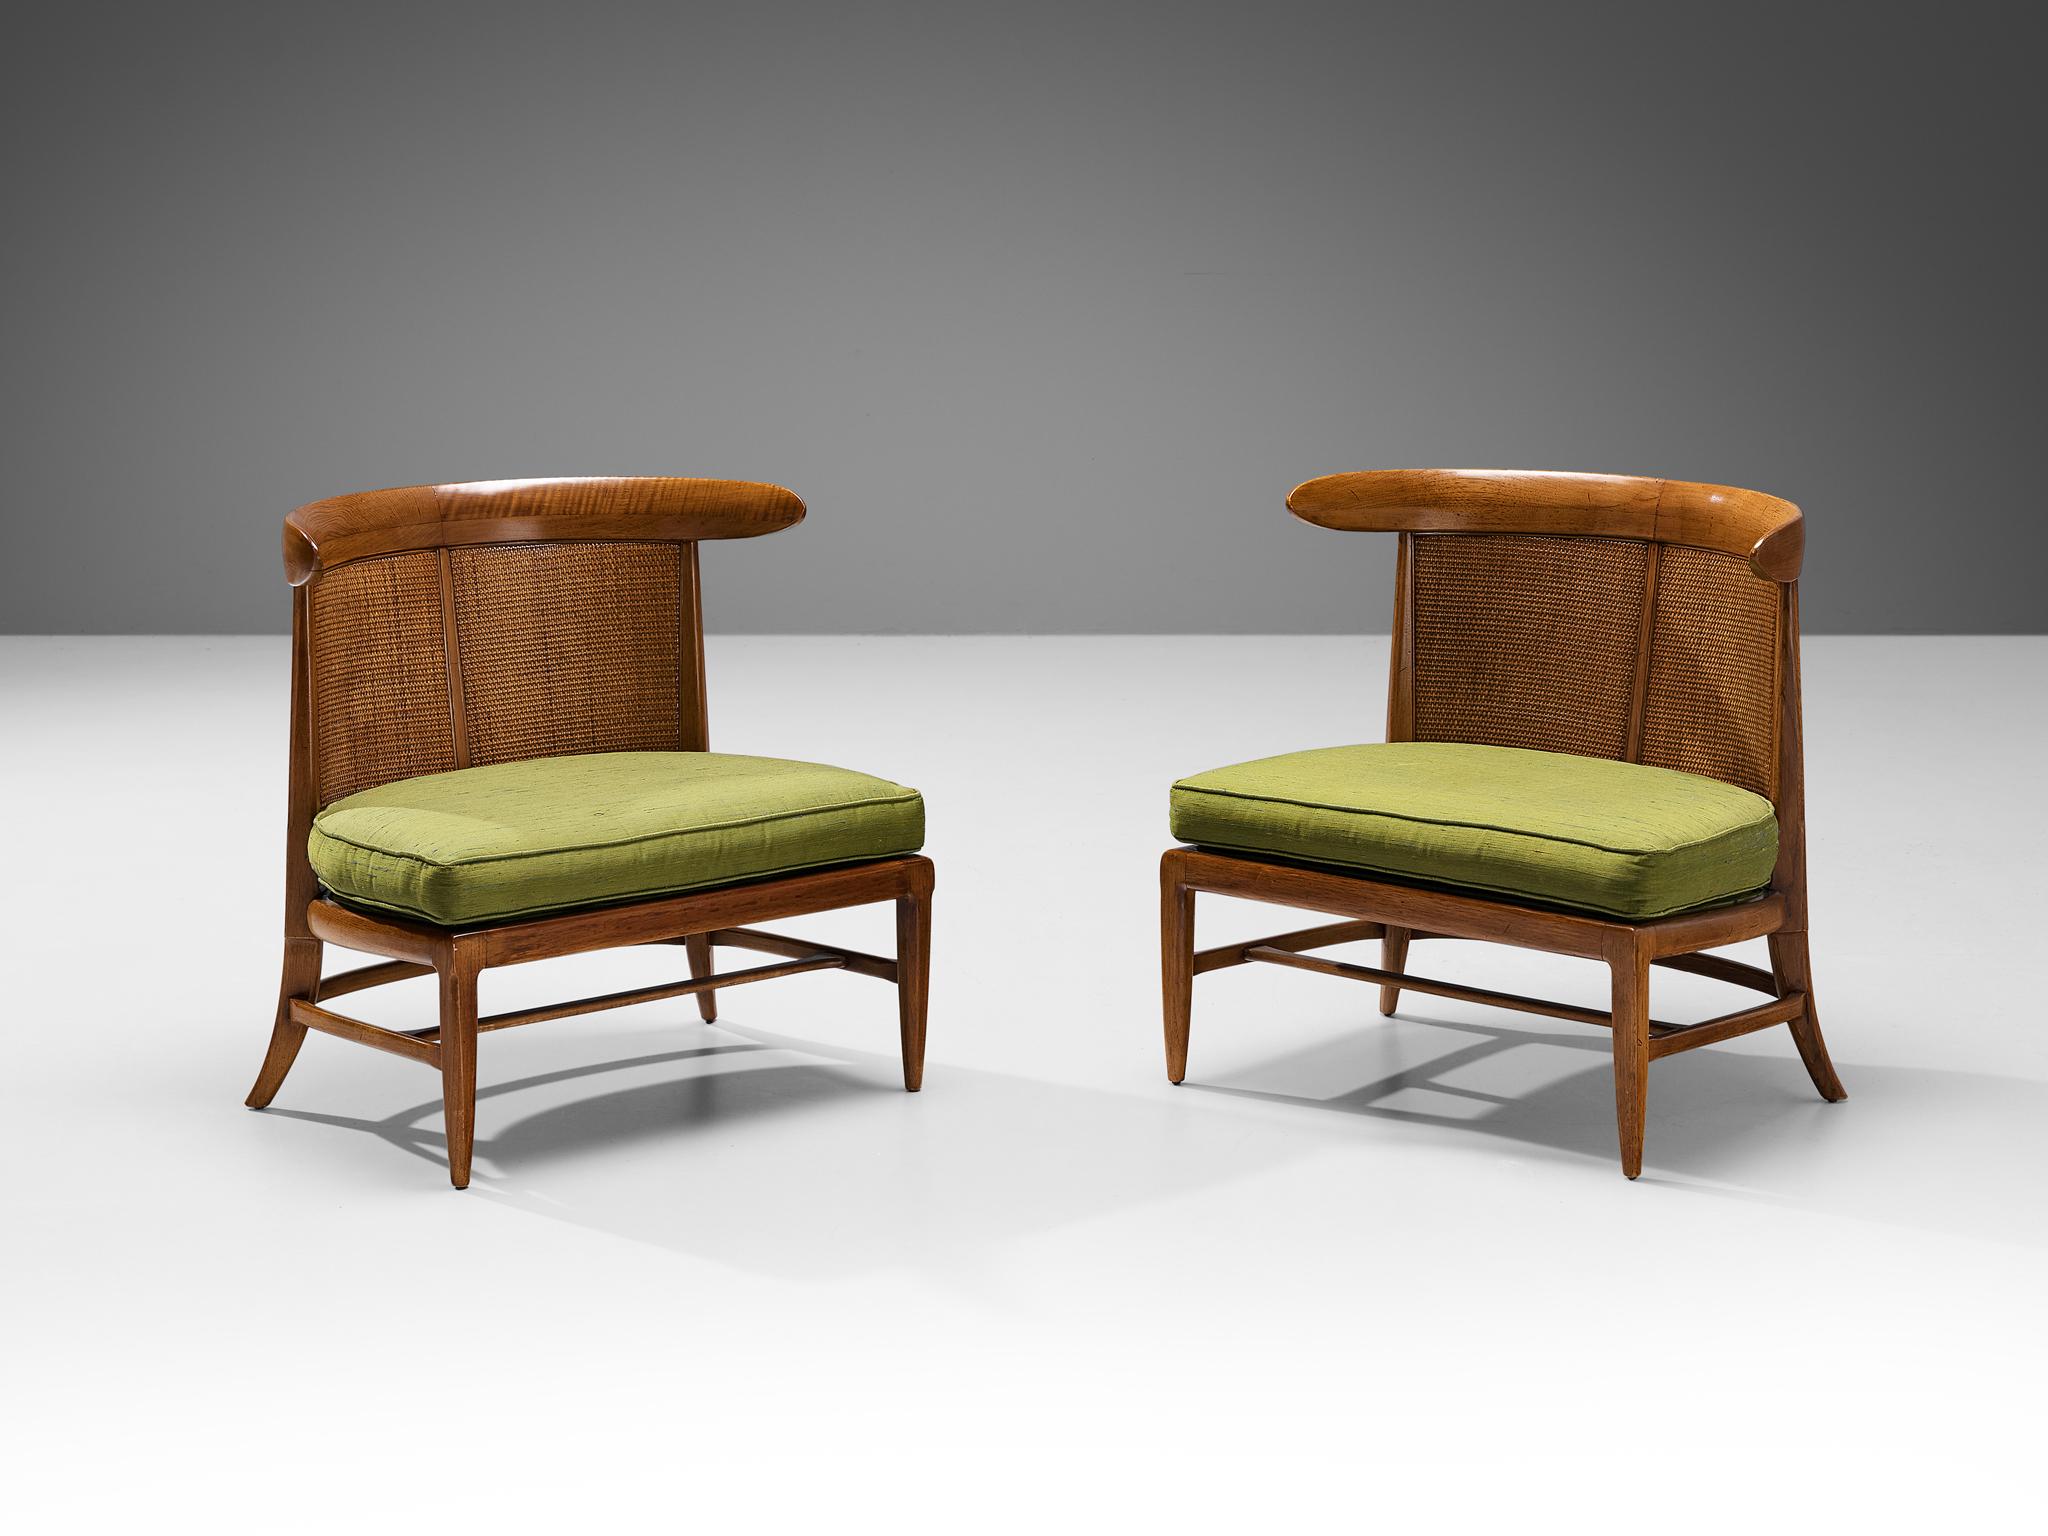 John Lubberts & Lambert Mulder for Tomlinson, pair of easy chairs, model '650', walnut, cane, fabric, United States, 1950s

This pair of American easy chairs are designed by the duo John Lubberts & Lambert Mulder for Tomlinson in the 1950s. The